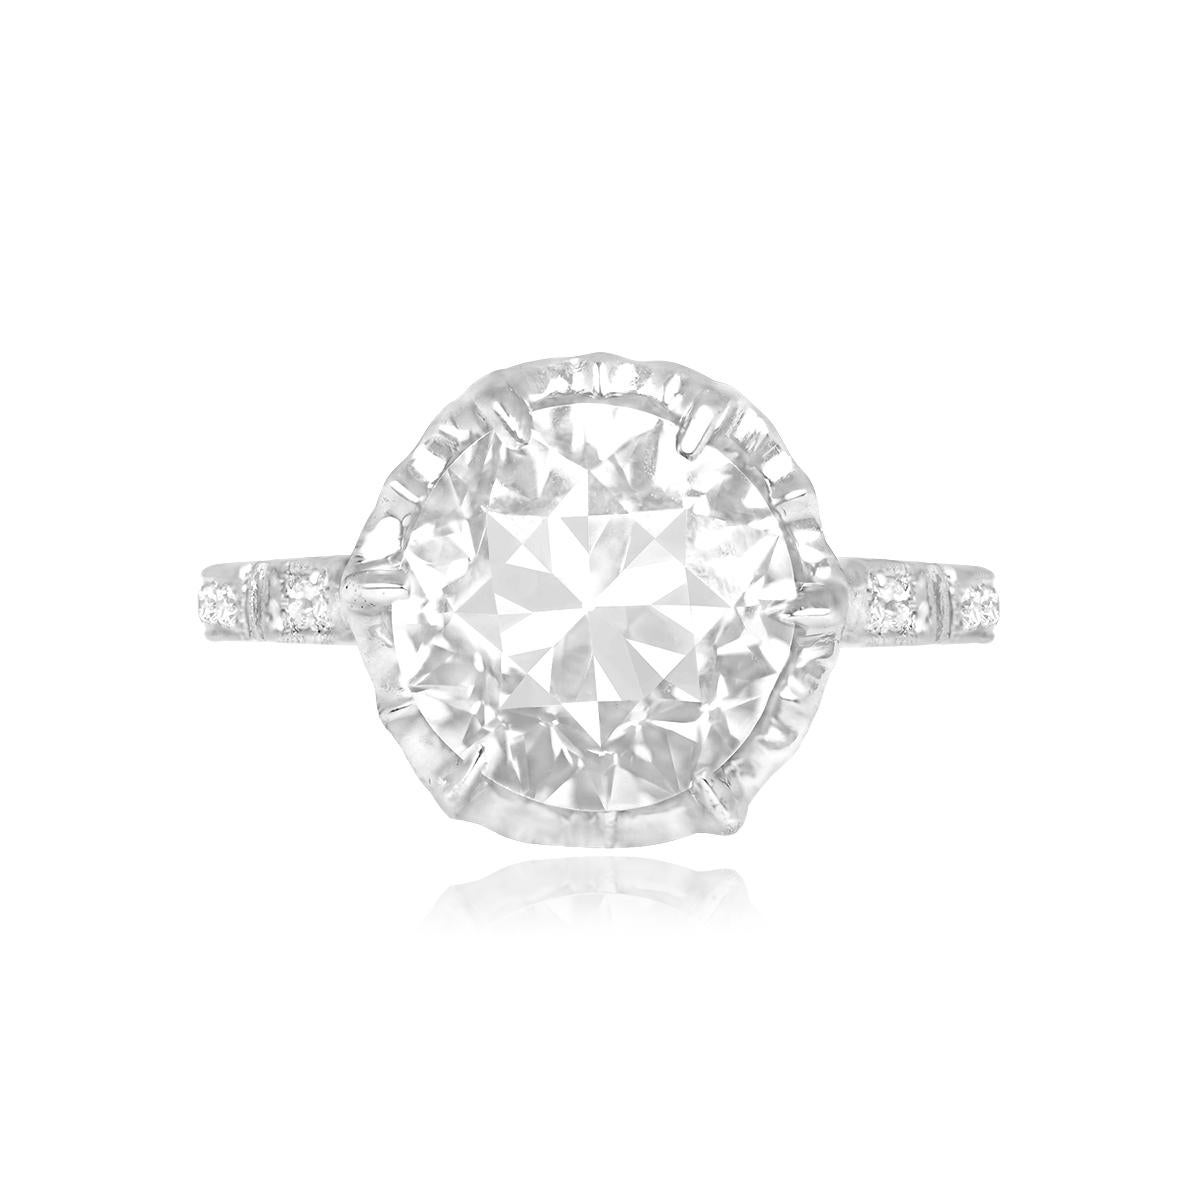 Sophisticated Art Deco engagement ring showcases a prong-set, 2.88-carat old European cut diamond (L color, VS1 clarity). Three additional old European cut diamonds grace each shoulder. The ring boasts an openwork under gallery design and delicate